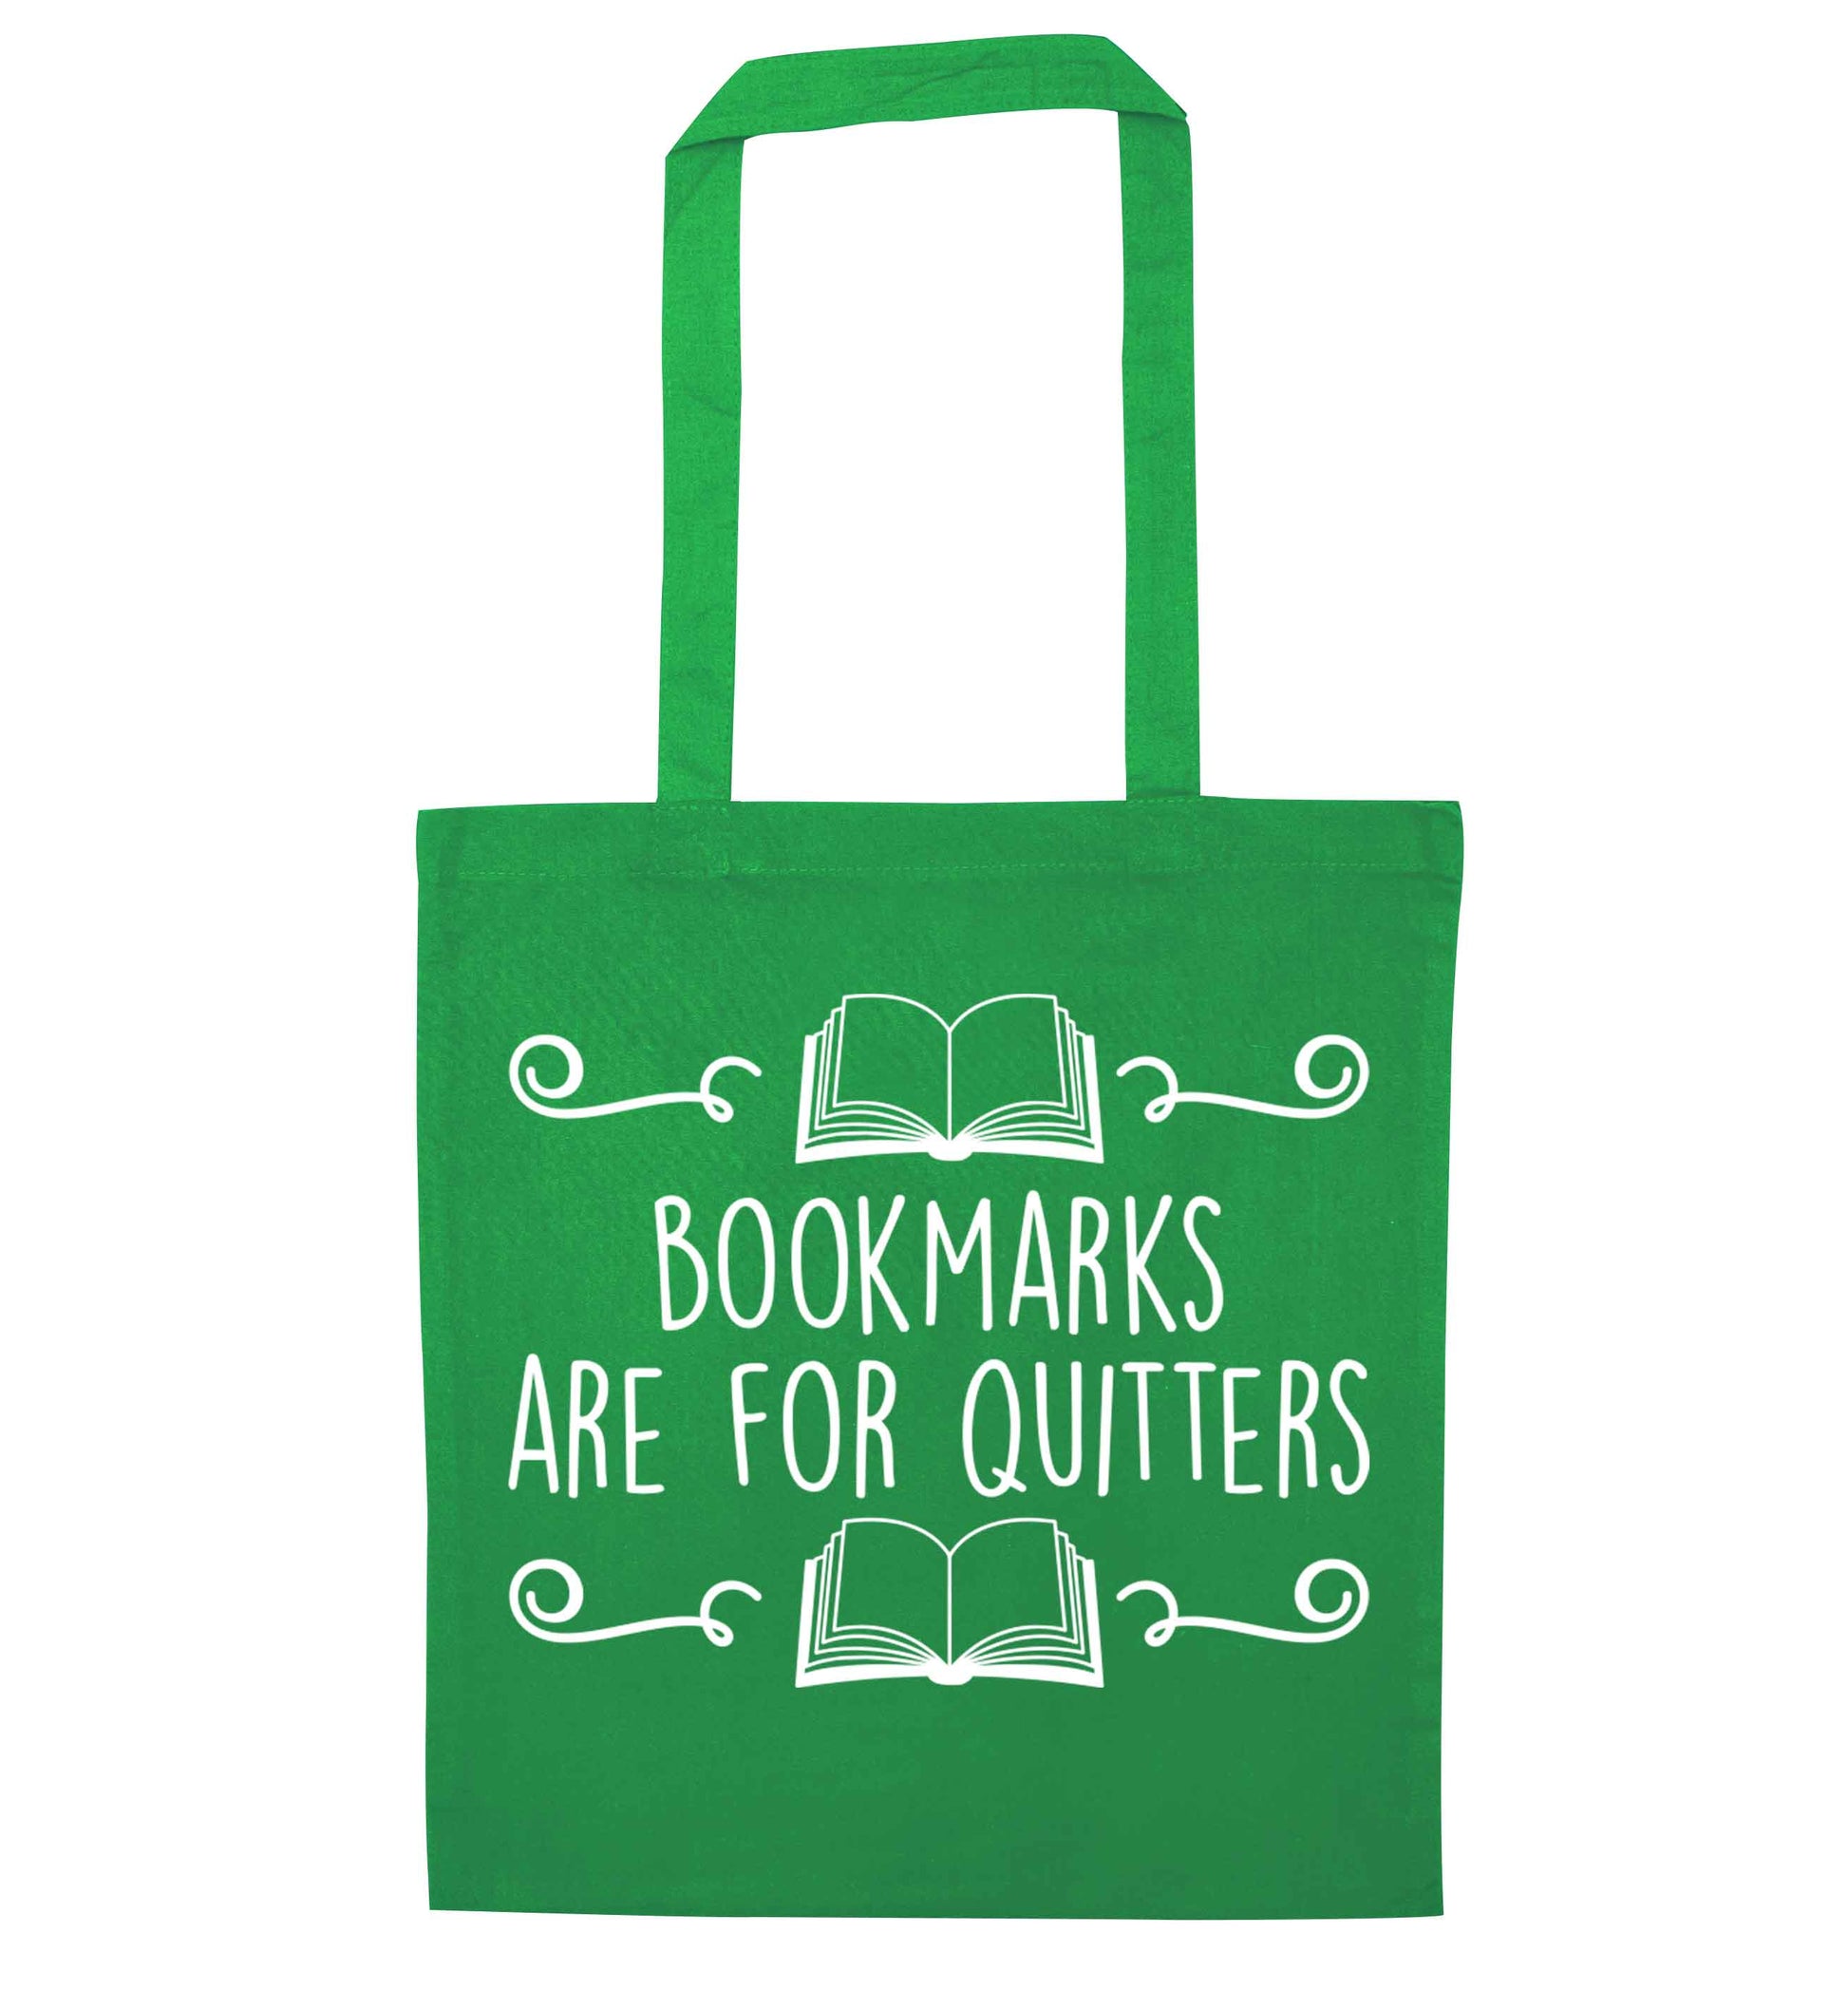 Bookmarks are for quitters green tote bag